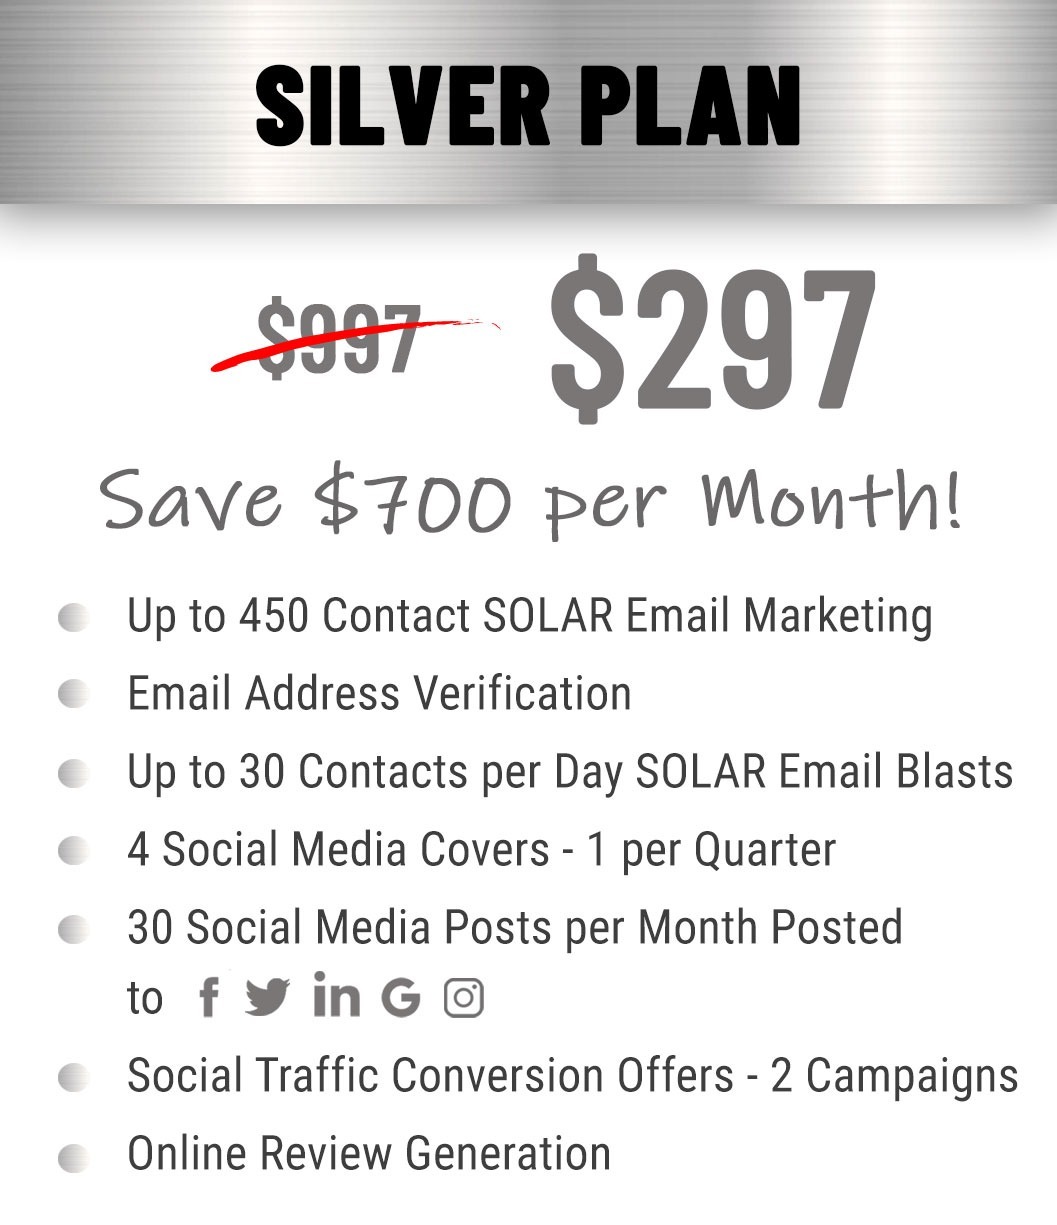 Silver Plan Pricing and Features SOLAR